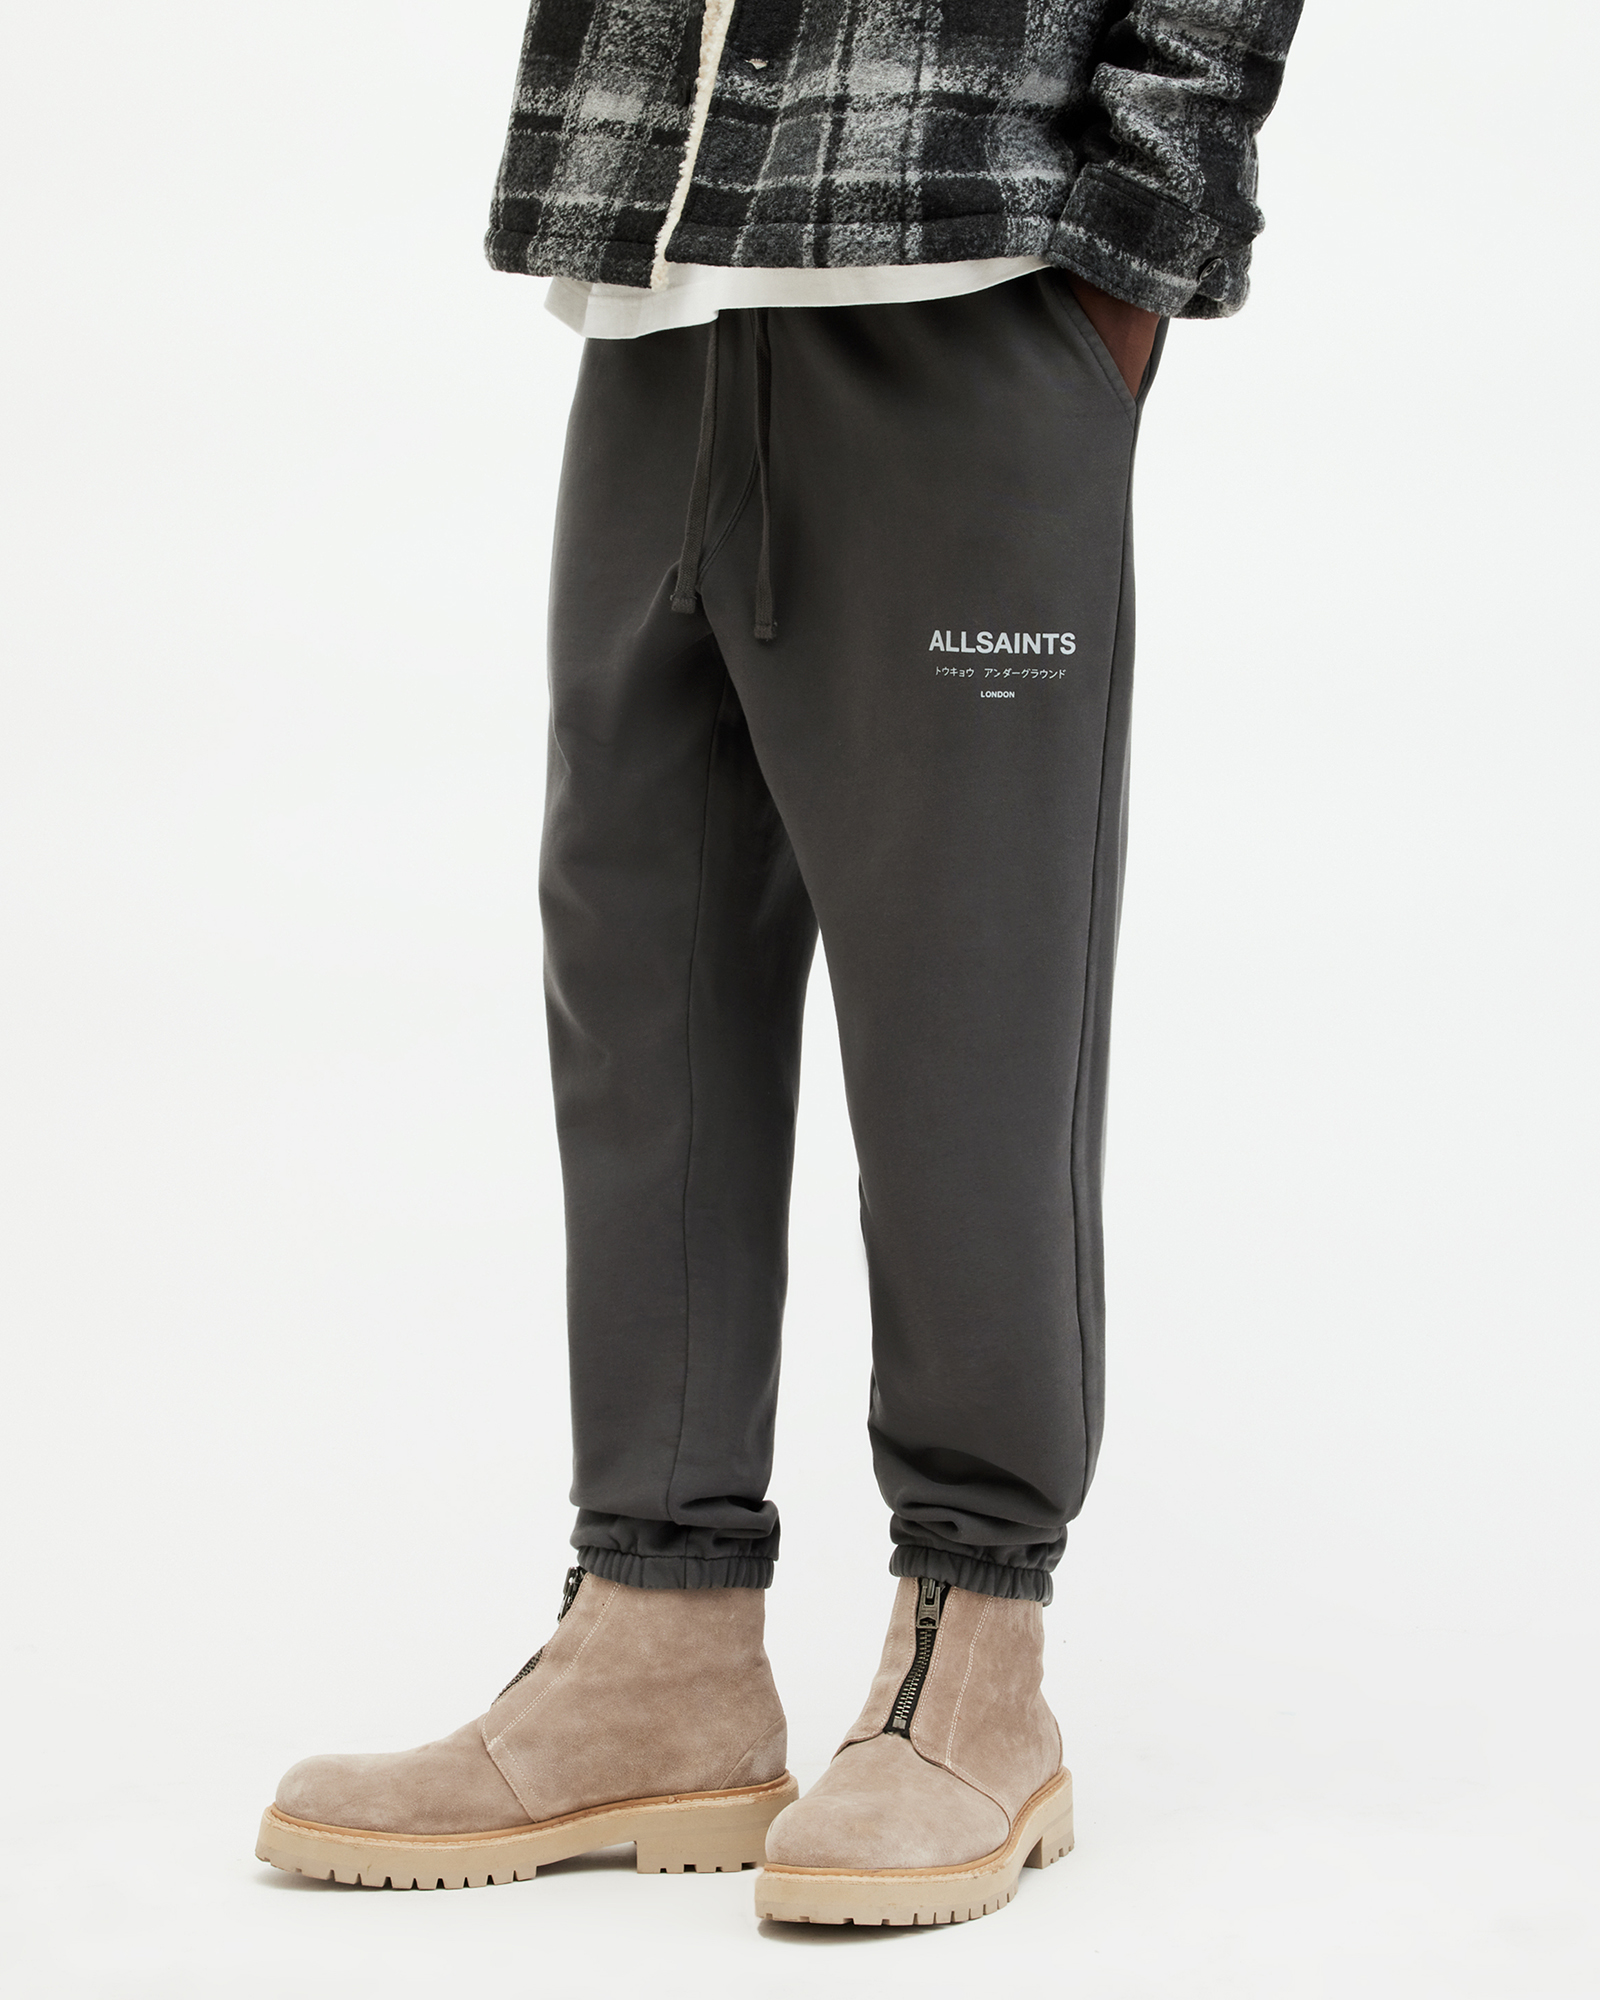 AllSaints Underground Logo Relaxed Fit Sweatpants,, SHADED GREY